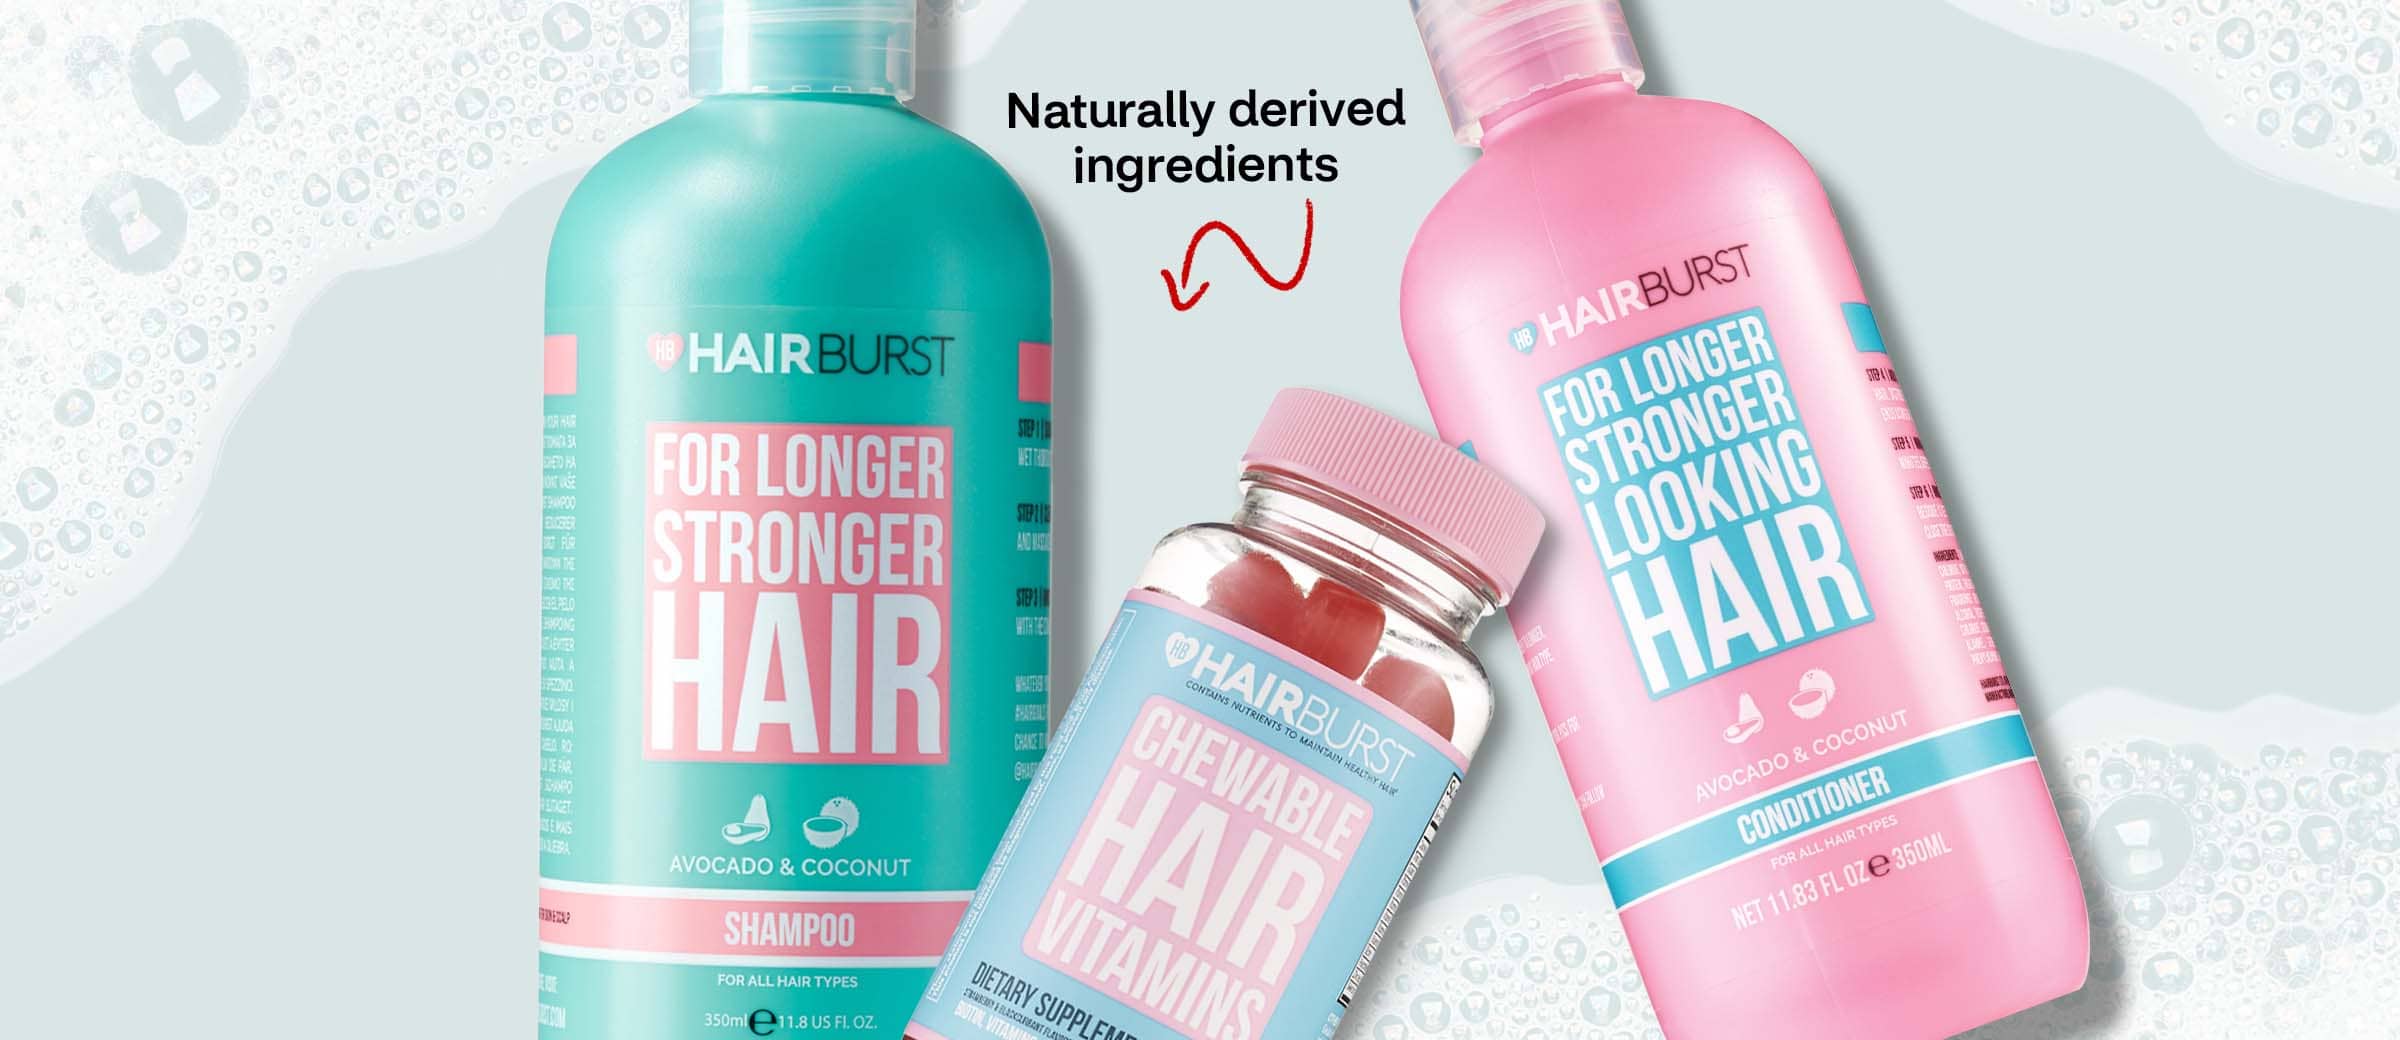 Naturally derived ingredients, Hairburst® hair regrowth products